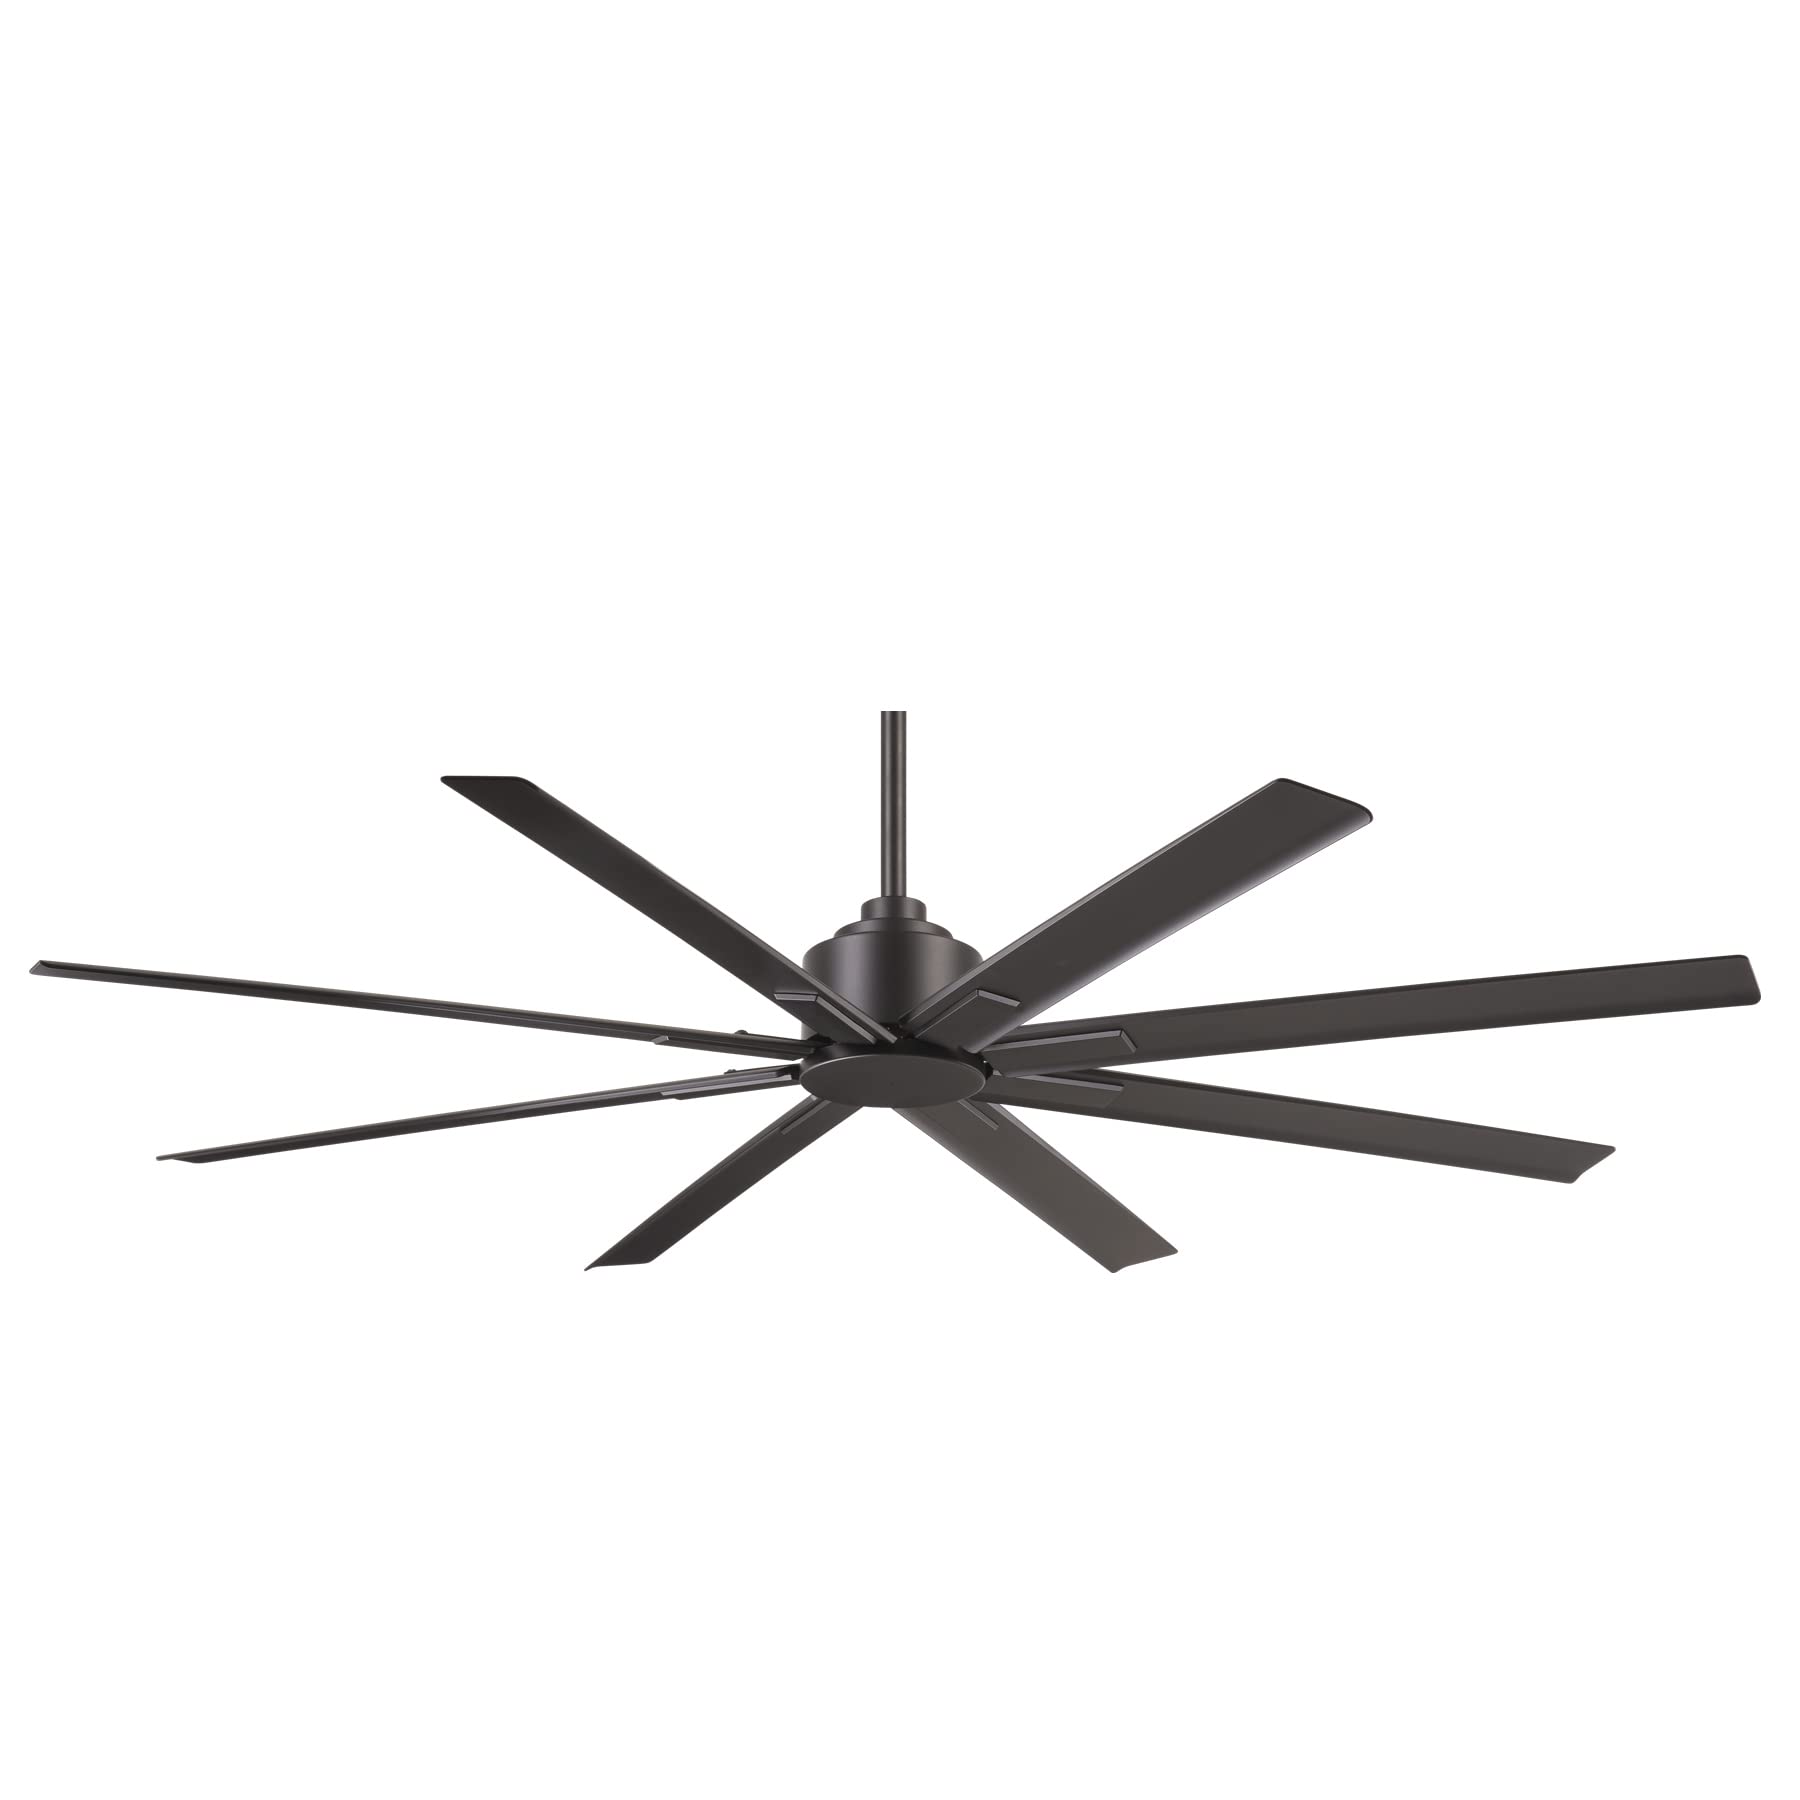 Minka Aire Xtreme H2O - 65-inch Ceiling Fan F896-65-SI, Smoked Iron, Reversible with Remote Control